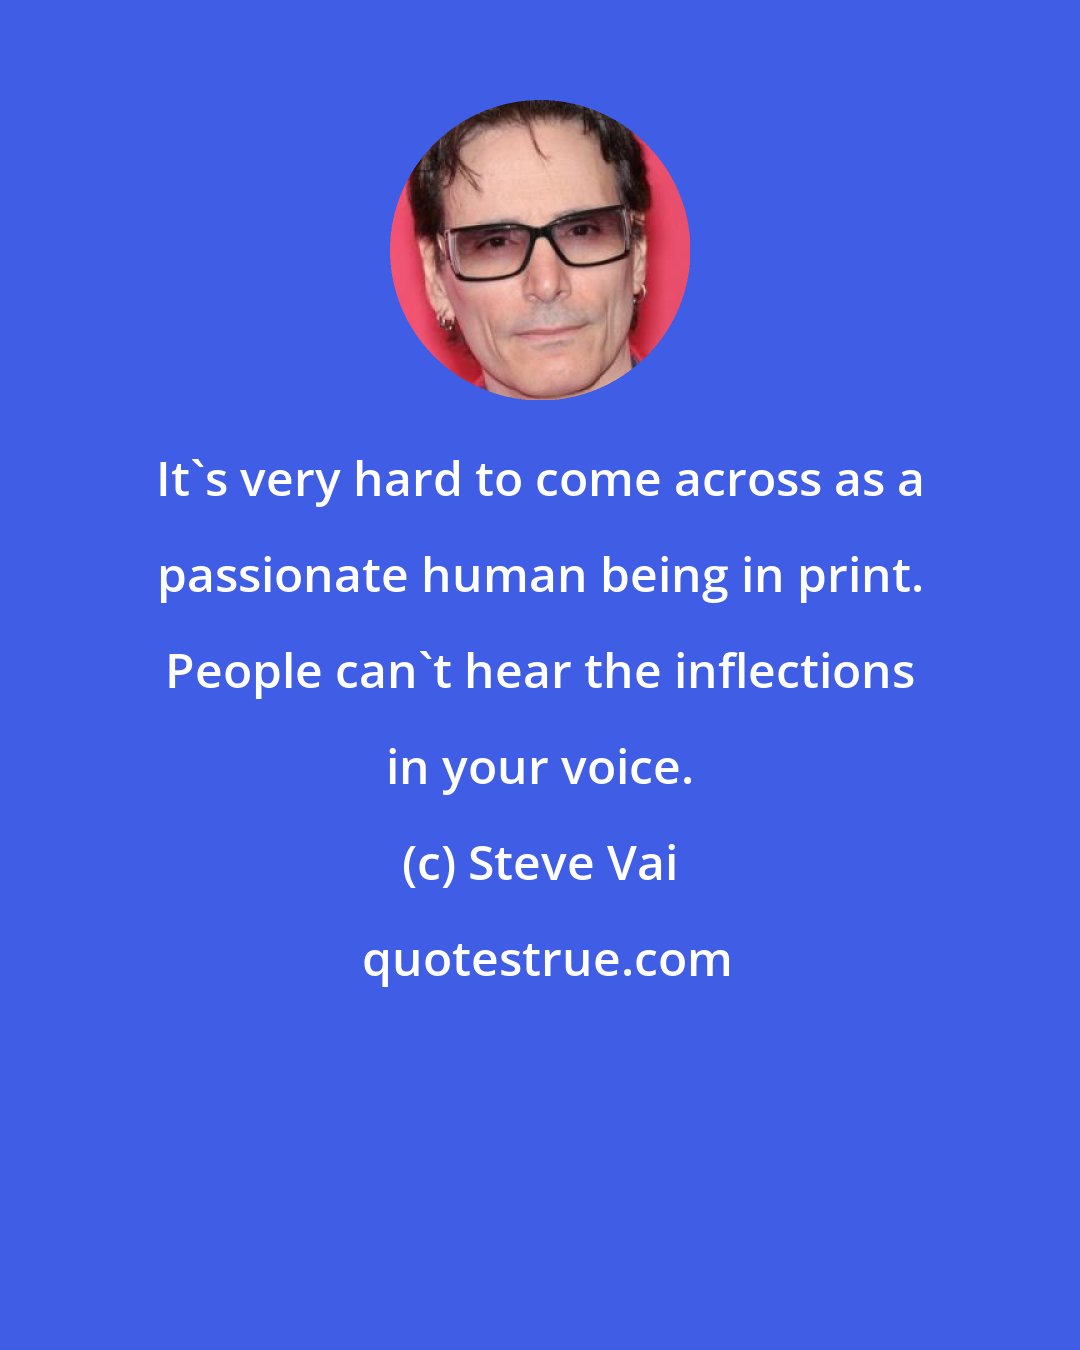 Steve Vai: It's very hard to come across as a passionate human being in print. People can't hear the inflections in your voice.